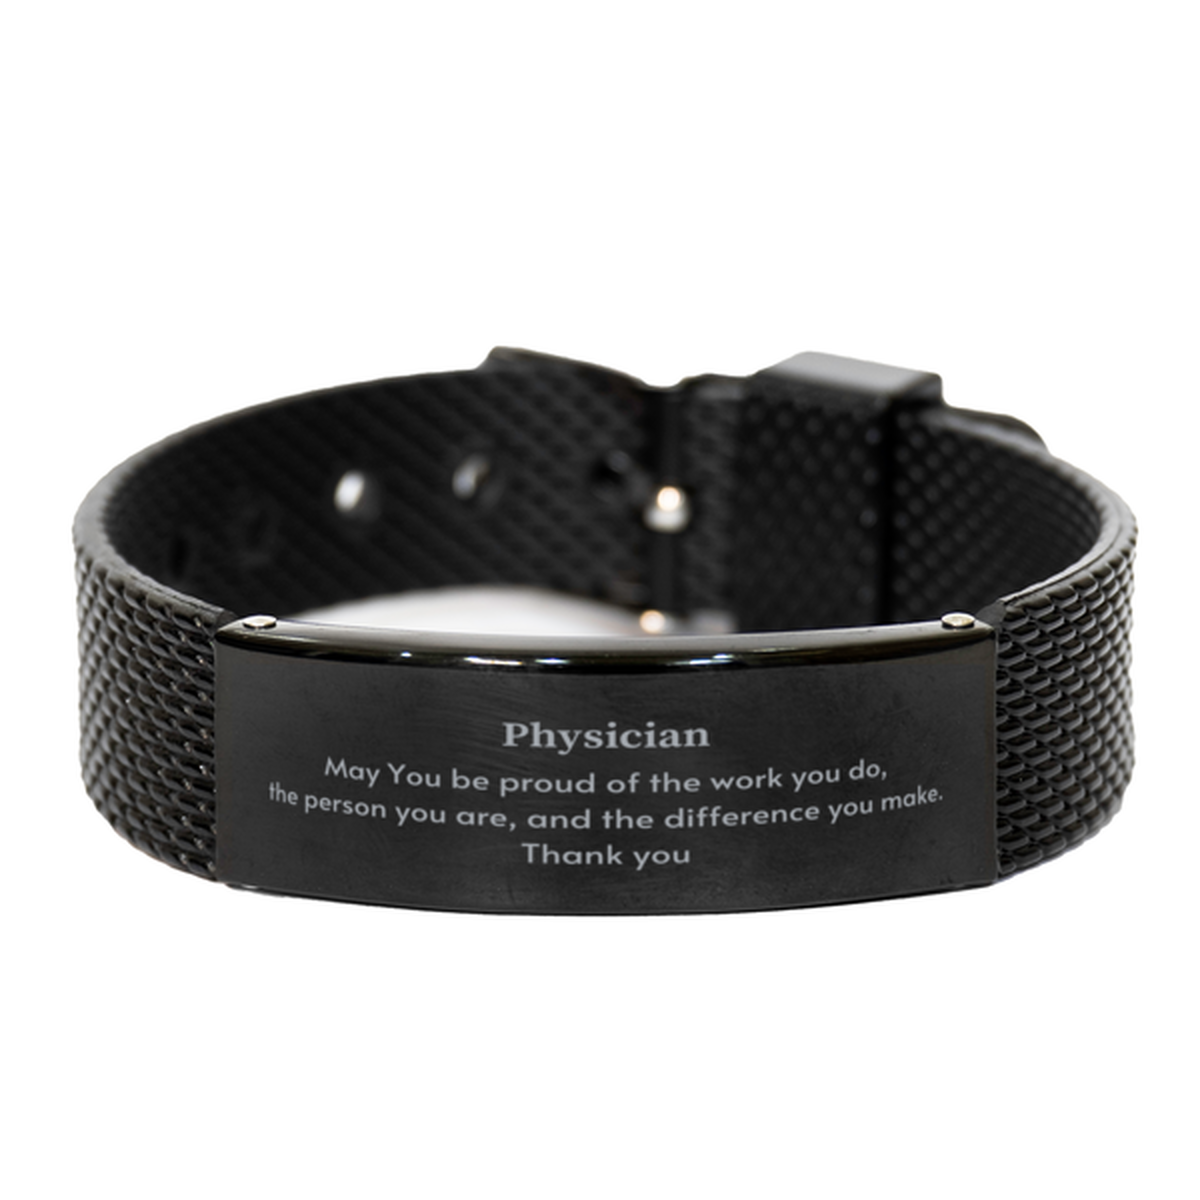 Heartwarming Black Shark Mesh Bracelet Retirement Coworkers Gifts for Physician, Physician May You be proud of the work you do, the person you are Gifts for Boss Men Women Friends